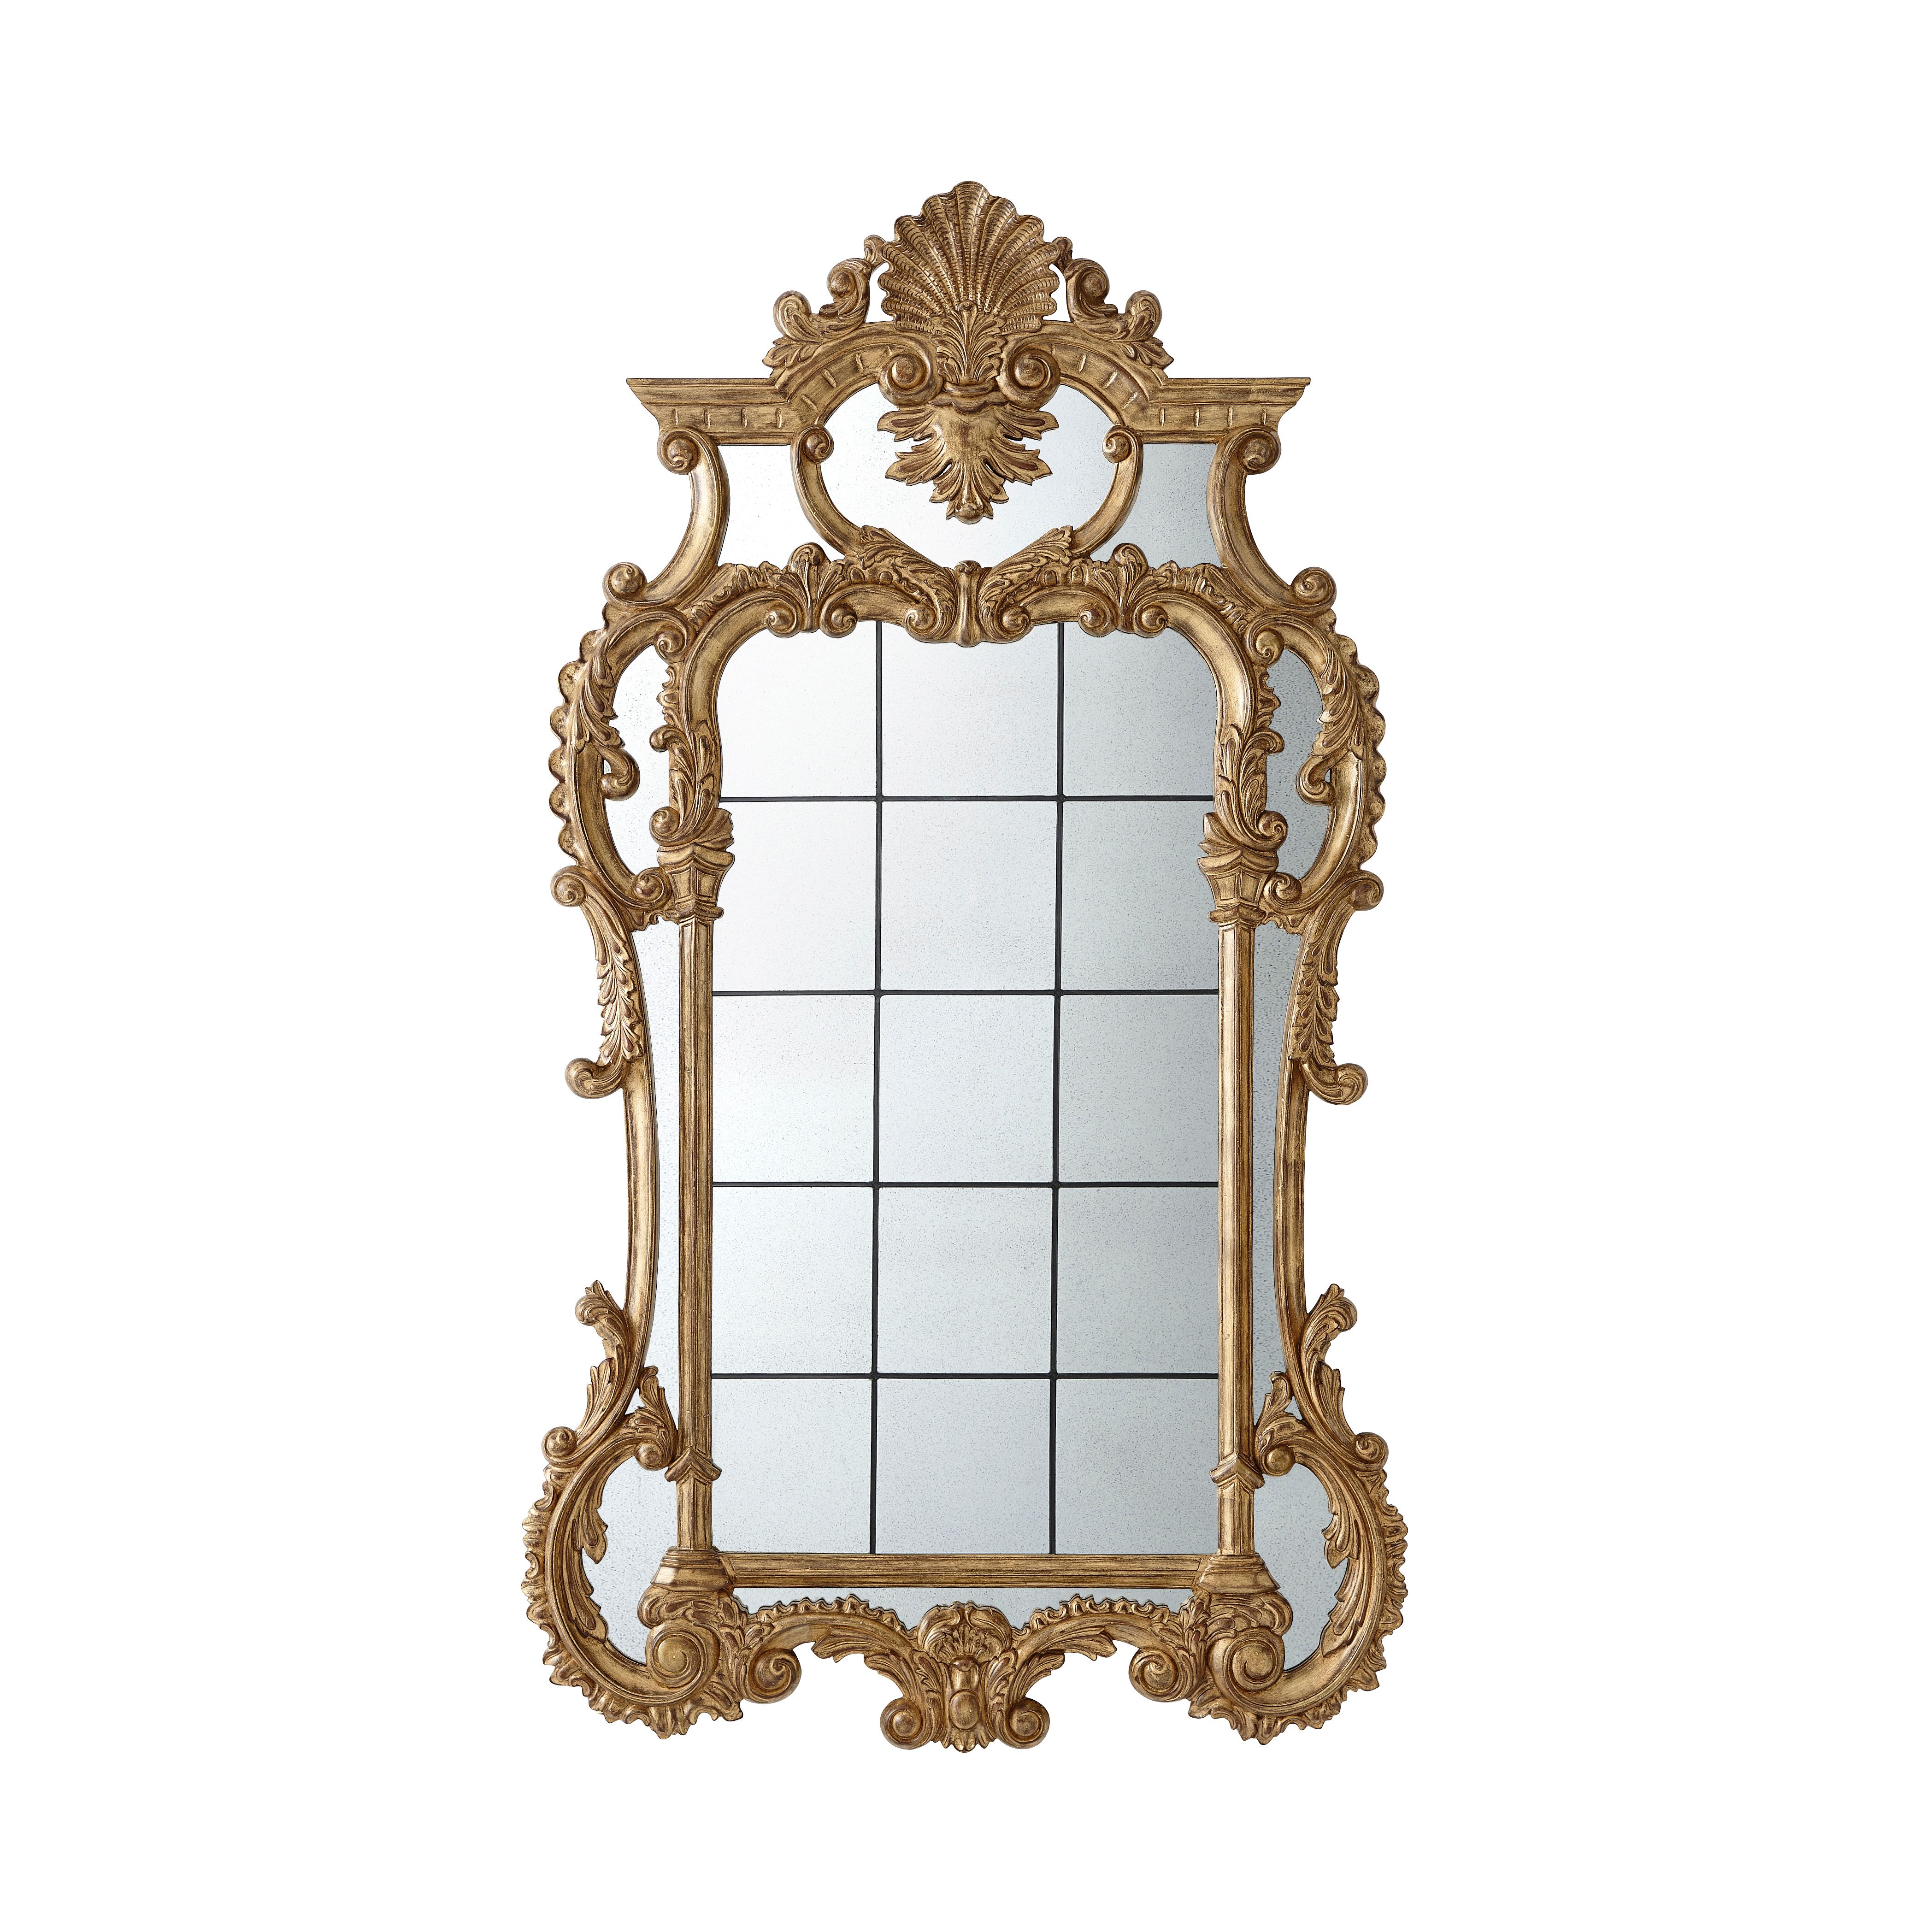 The Linnell ‘C’ Scroll Wall Mirror